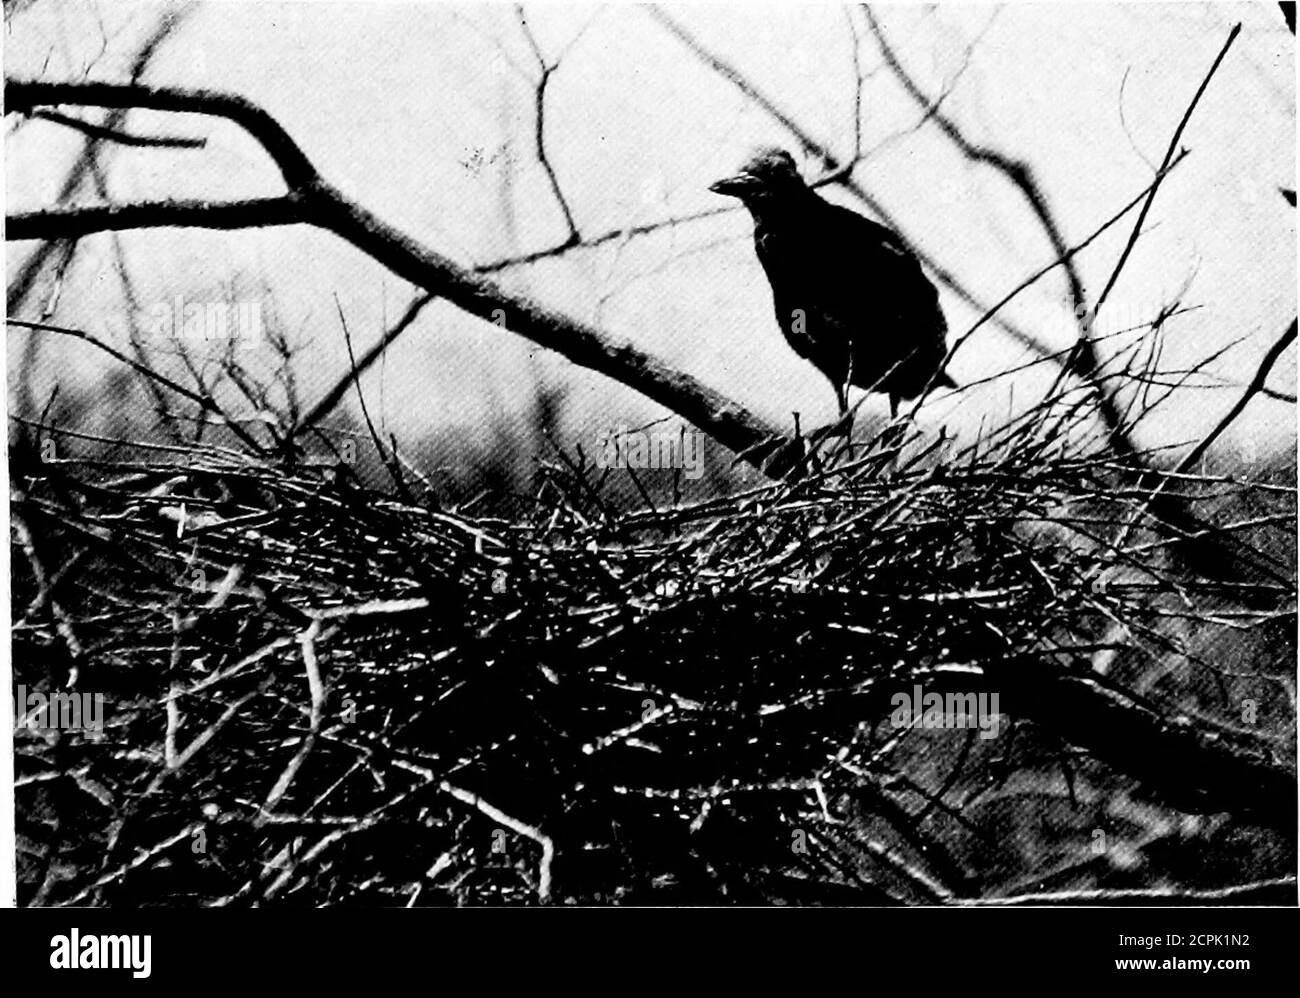 . The sport of bird-study; a book for young or active people . thenext bush, tied the focus-cloth about the top to suggesta camera, decked it with leaves, and left it over night,for the heron to become accustomed to it. Nextmorning I found her on the nest all right, so I sub-stituted my camera for the cloth, covered and arrangedit with thread attachment, and then hid about thirtyyards away between three tree sprouts which grewfrom a stump, a nice little island nook. After abouthalf an hours wait, the heron came sneaking back,climbing almost parrot-like from bush to bush. All thetime she was je Stock Photo